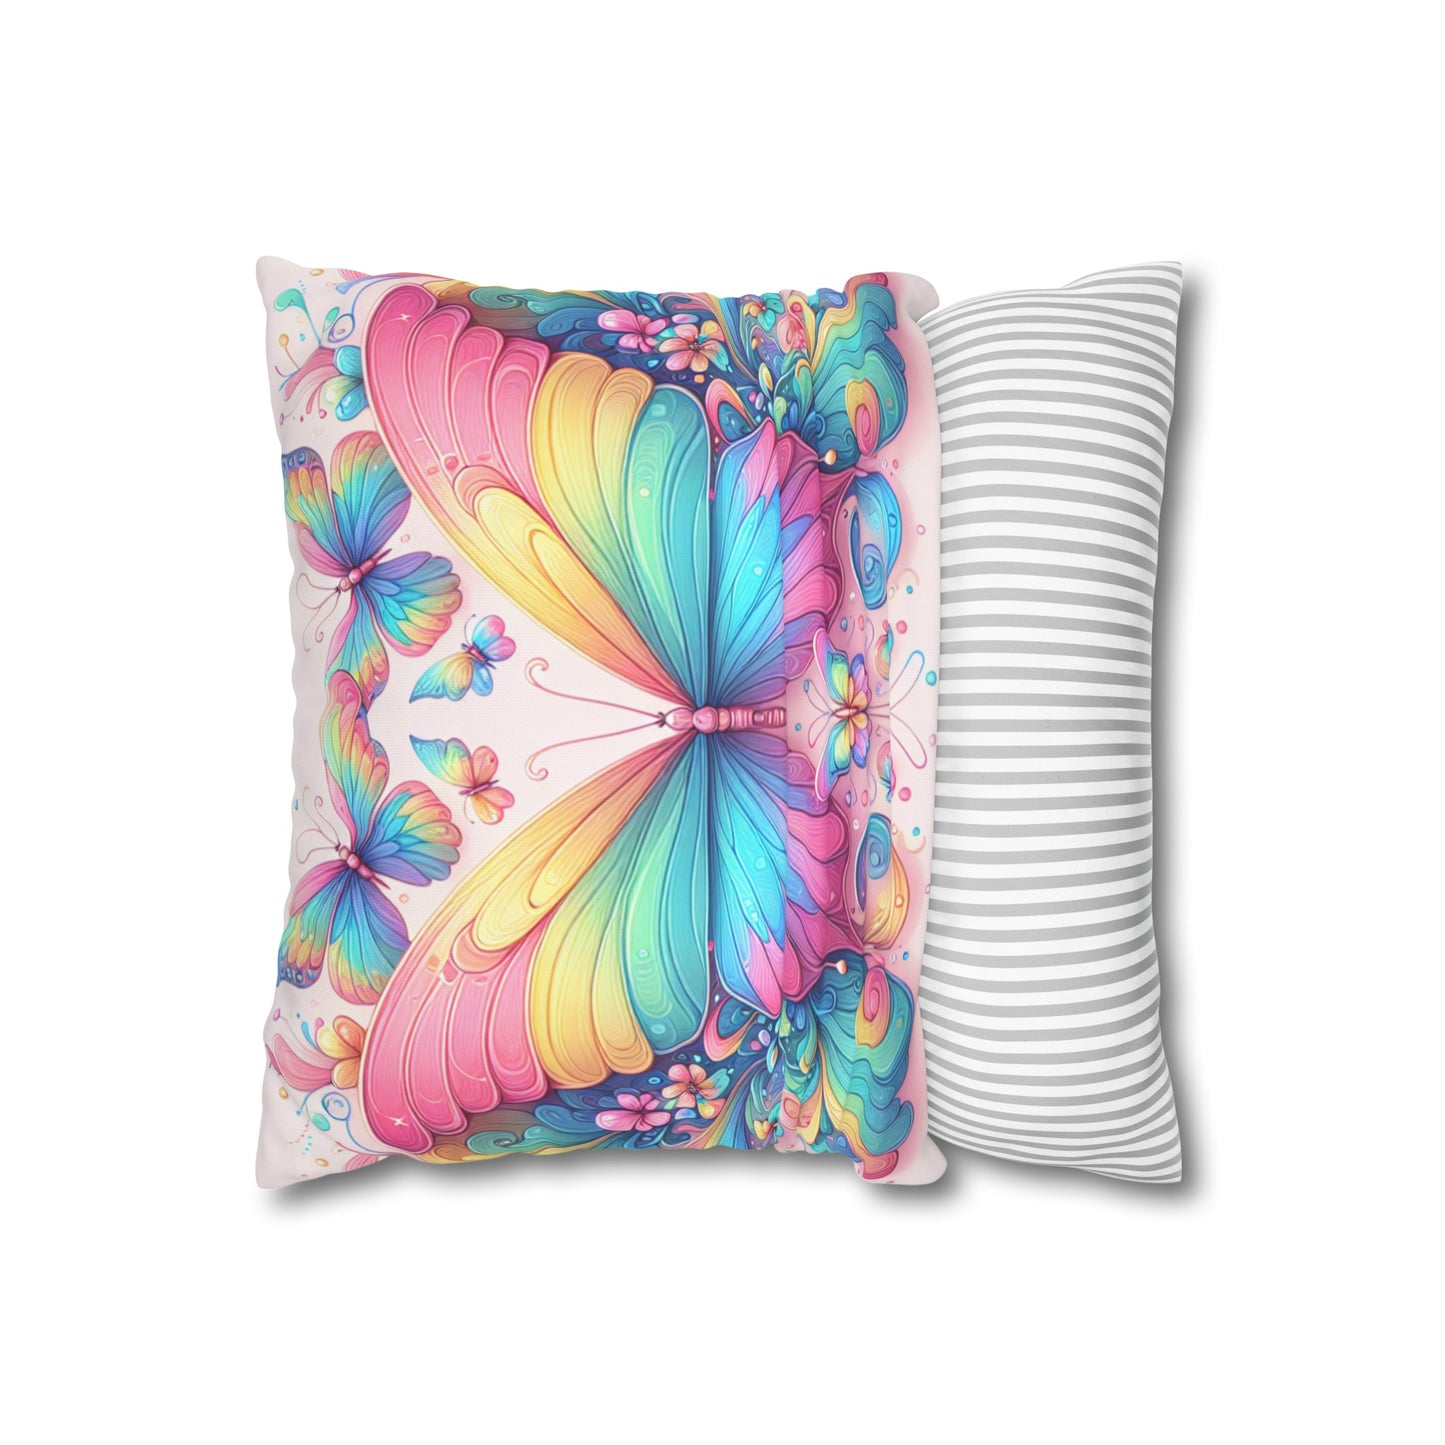 Psychedelic Rainbow Butterfly Cushion Cover